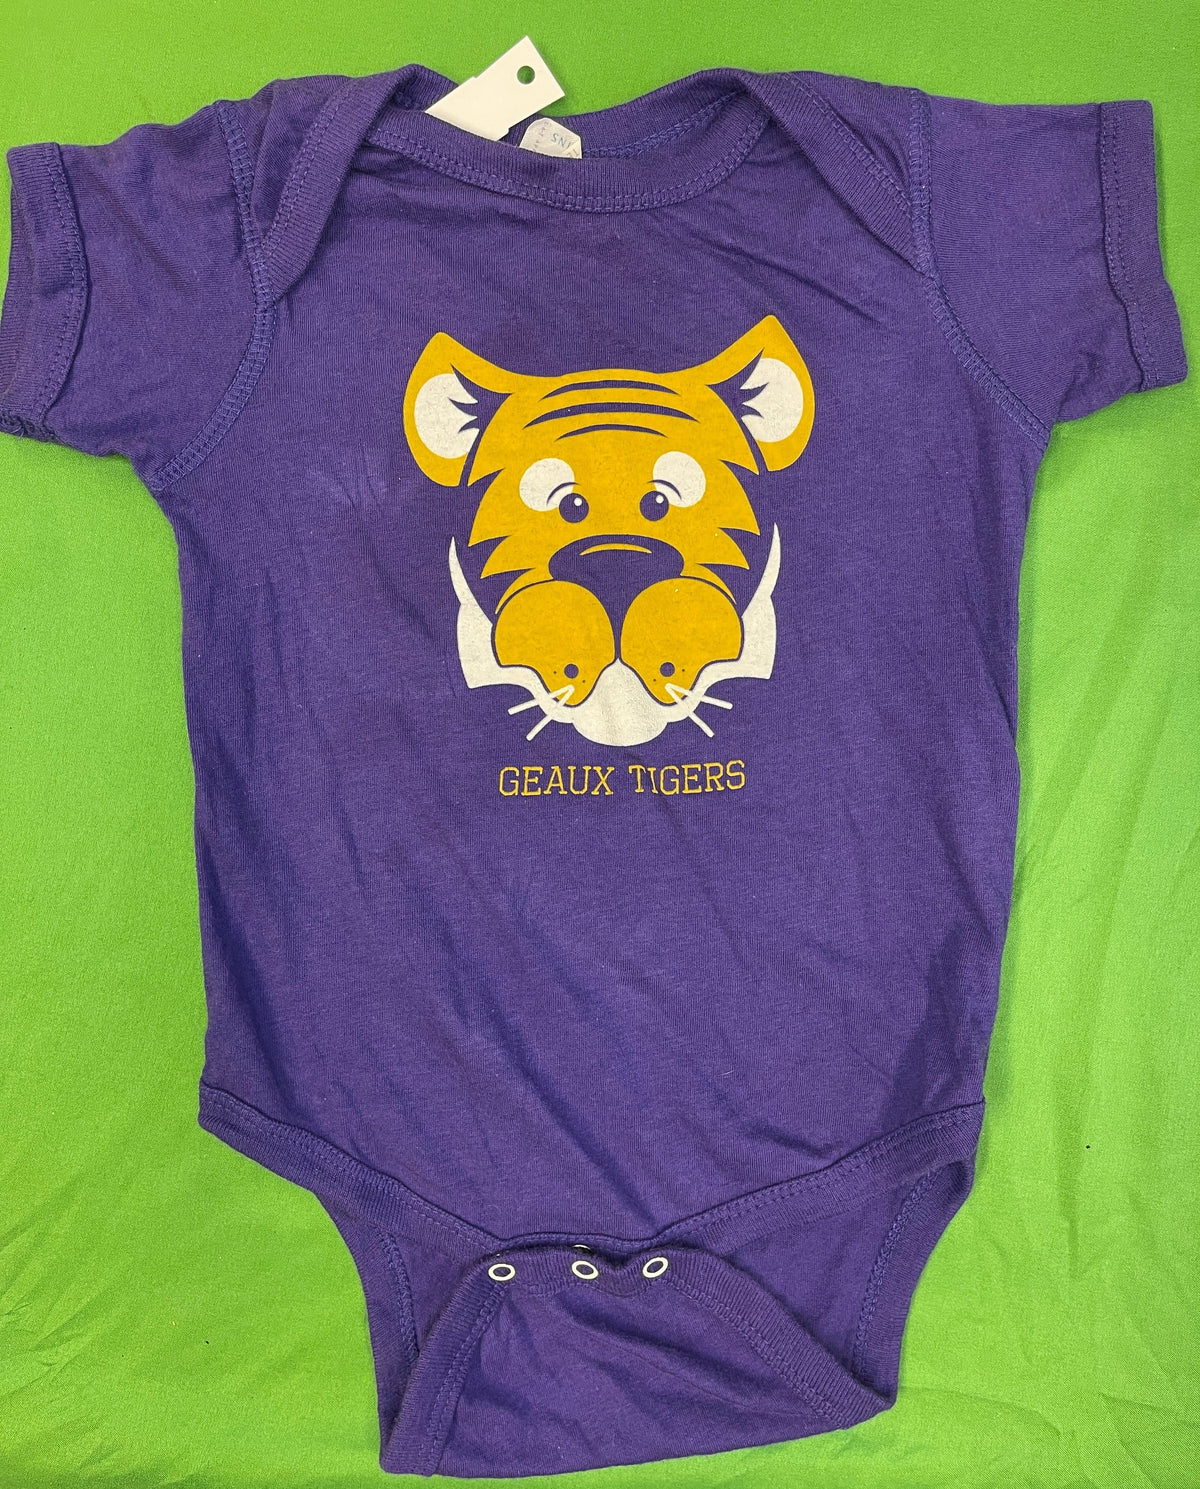 NCAA Louisiana State LSU Tigers Baby Infant Bodysuit/Vest 18 Months